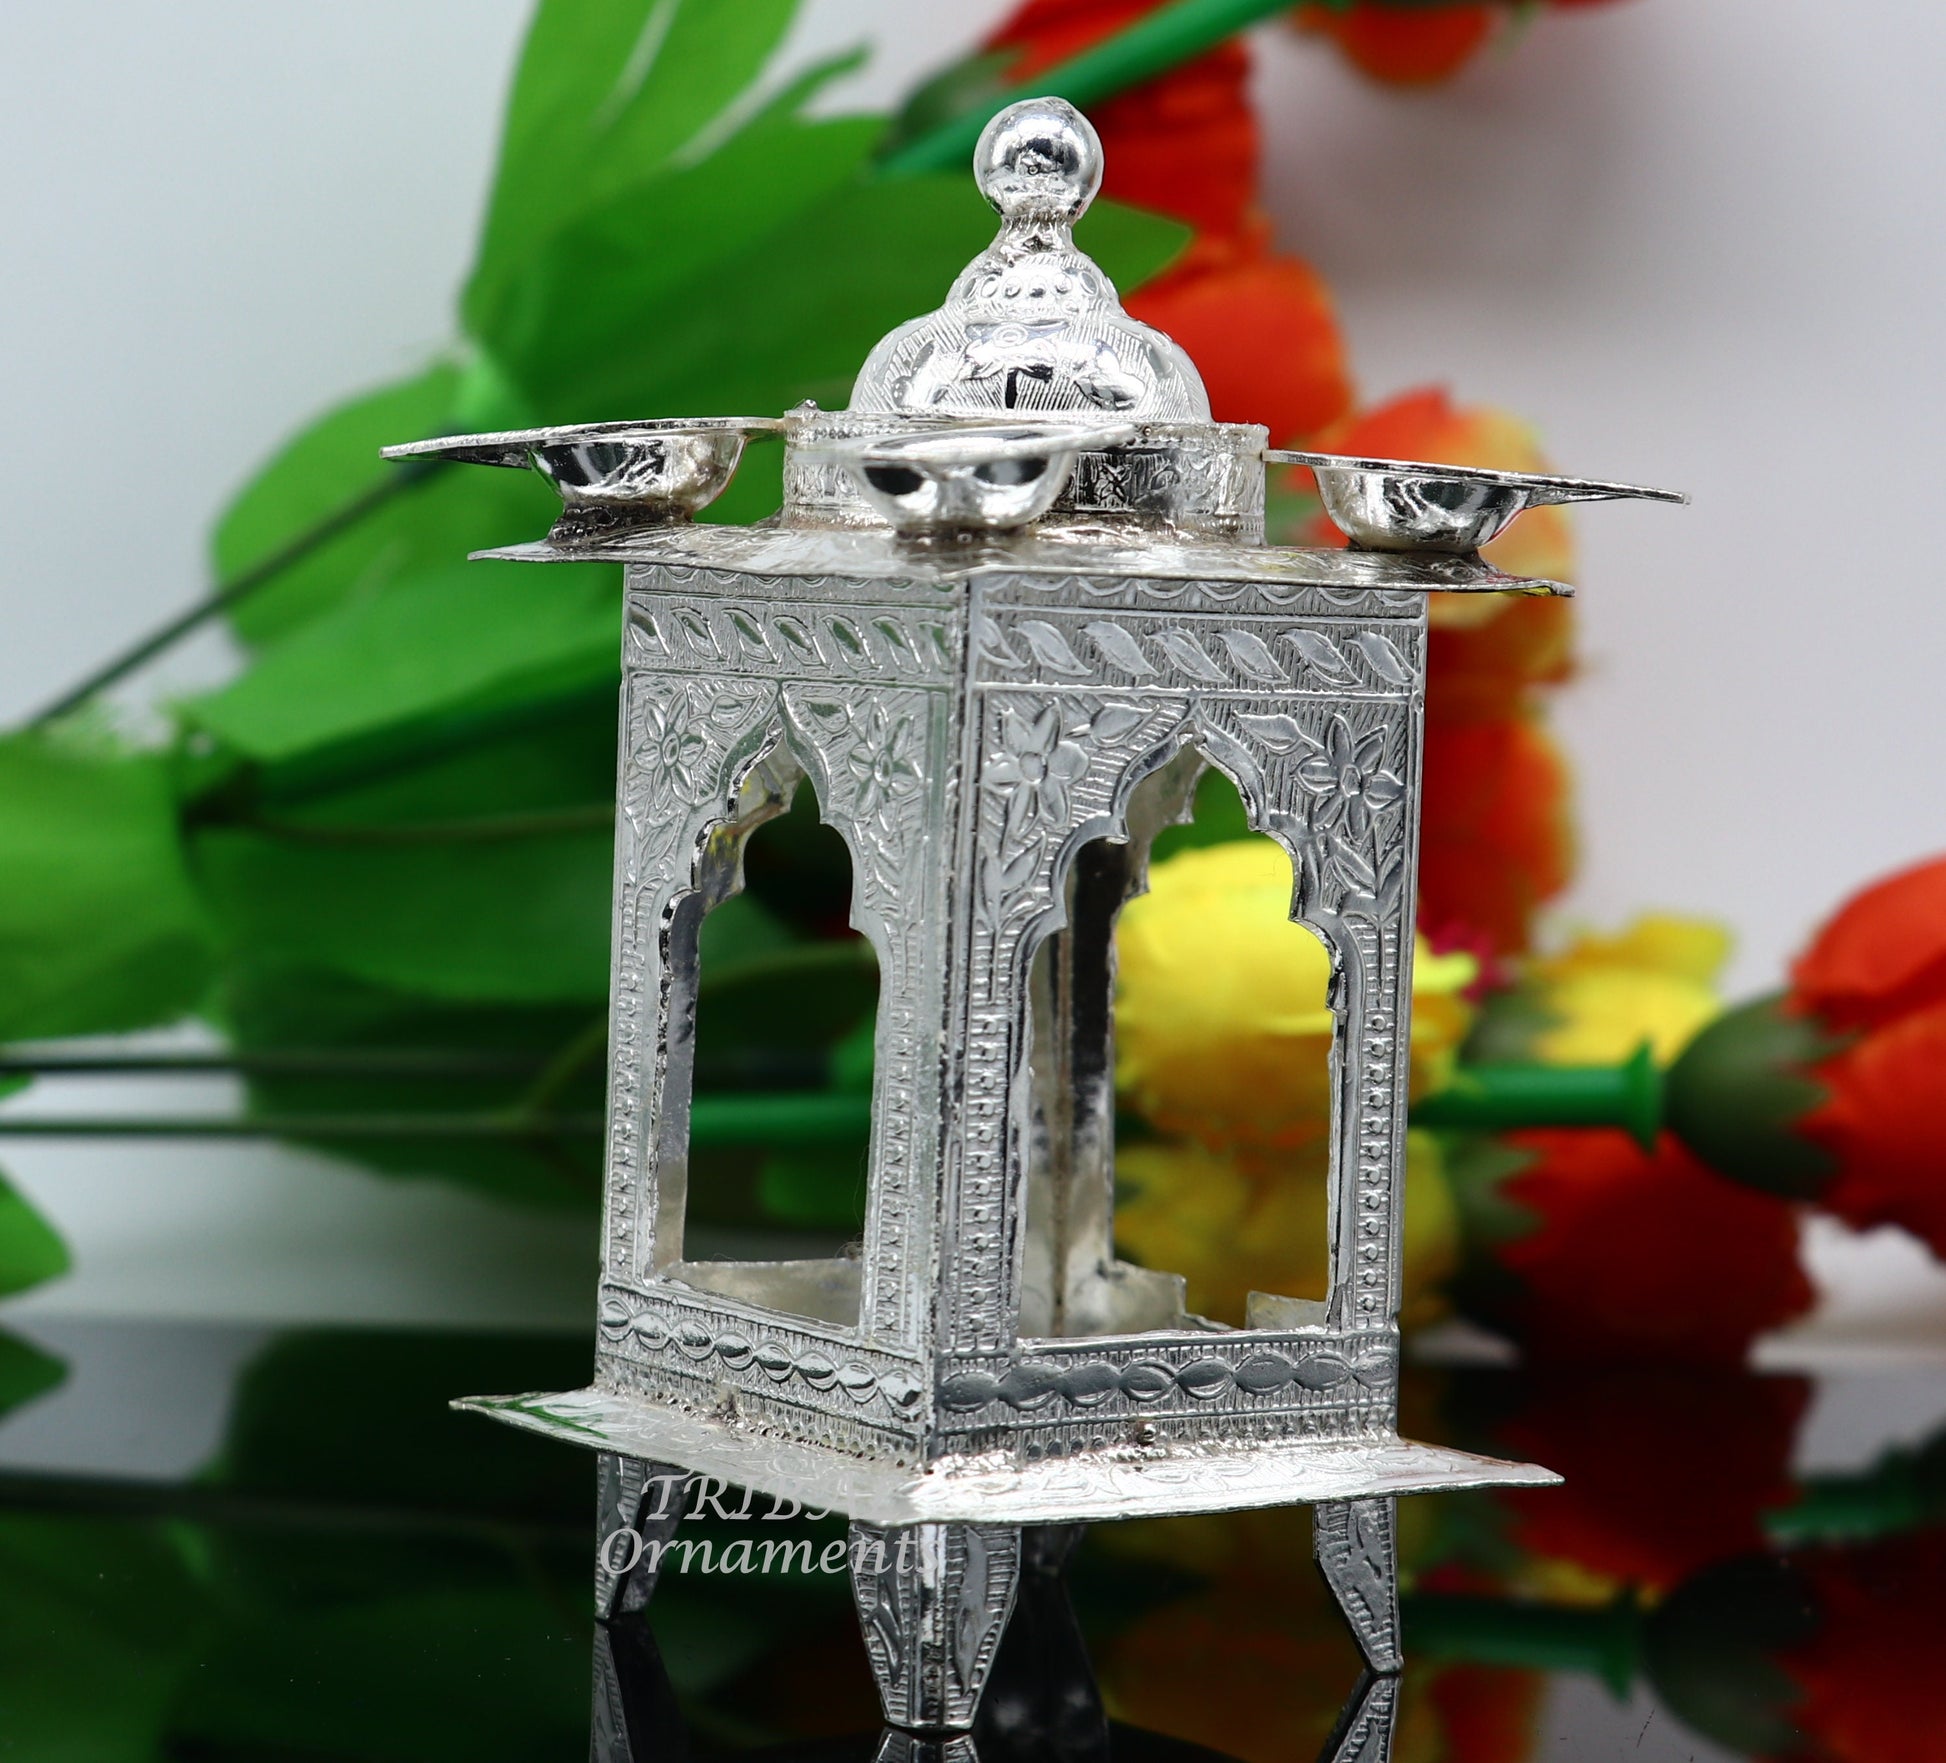 925 sterling silver handmade vintage design chattri temple lamp best puja article with 4 lamp on it, best home temple decor utensils su809 - TRIBAL ORNAMENTS